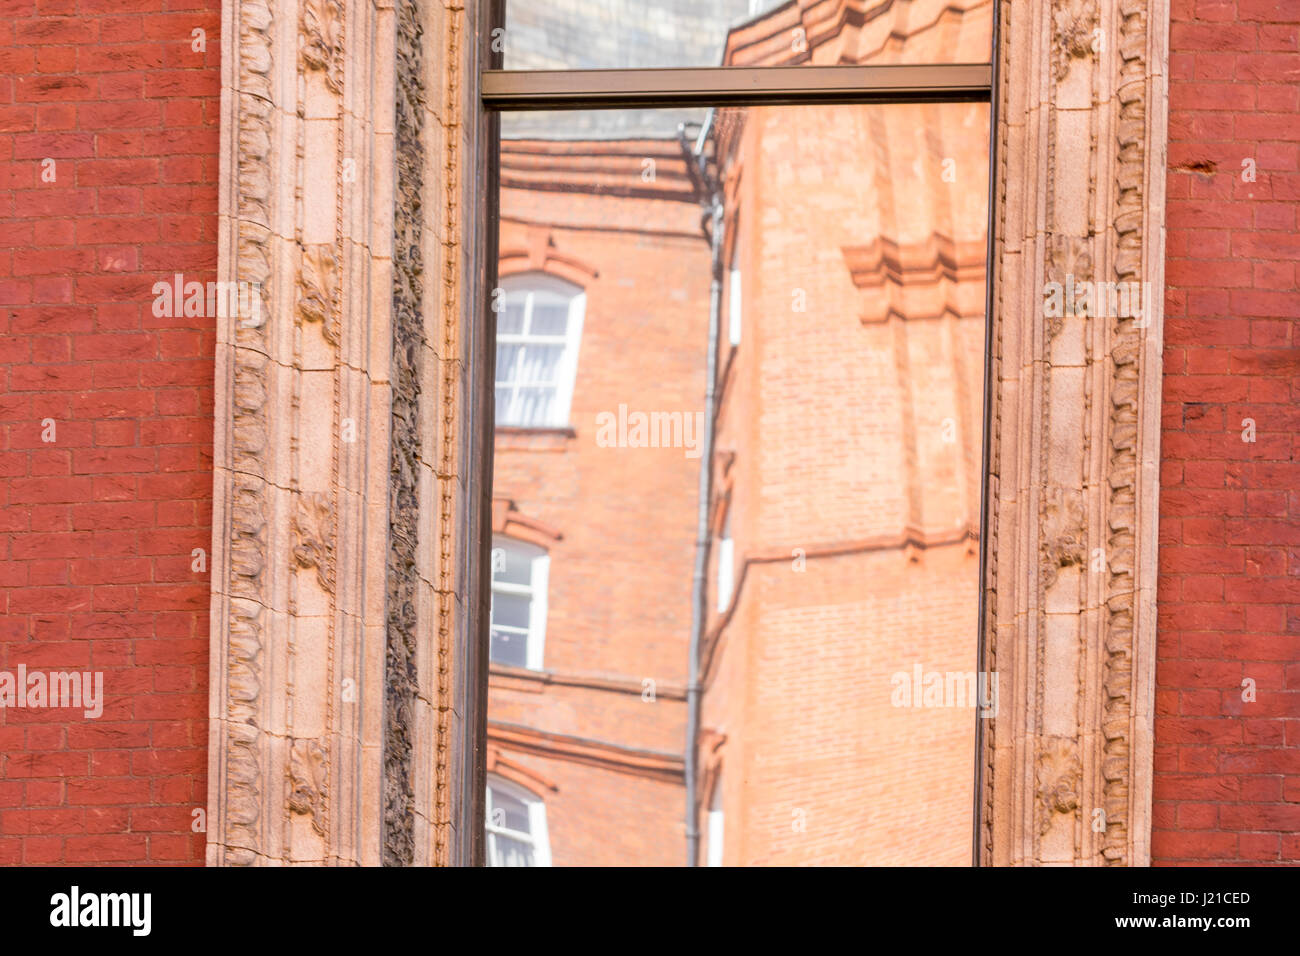 reflection of an old brick building in London in an a window with elaborate molding, London England, UK Stock Photo